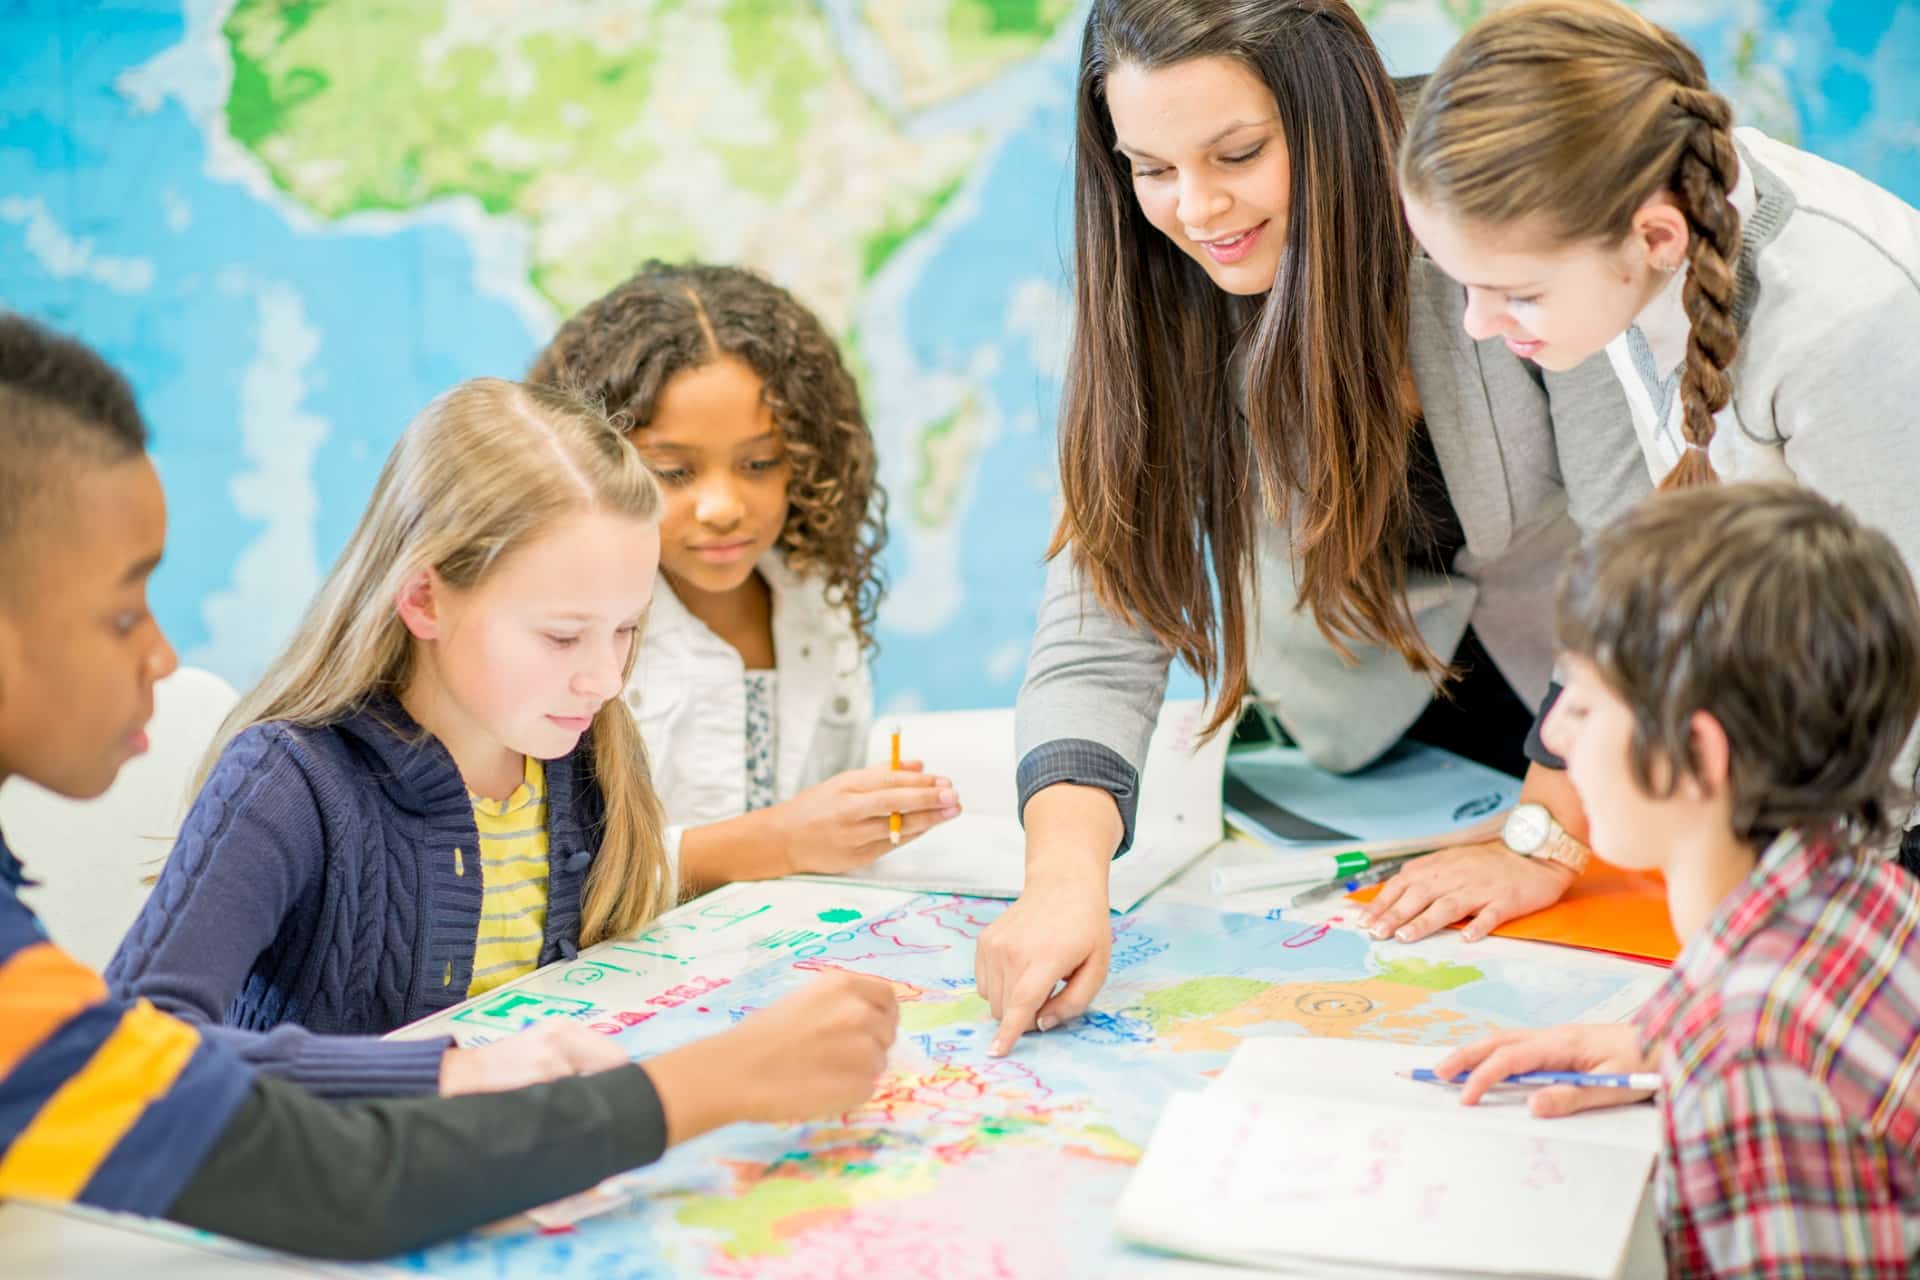 This is a photo of some young students and their teacher examining a large map.